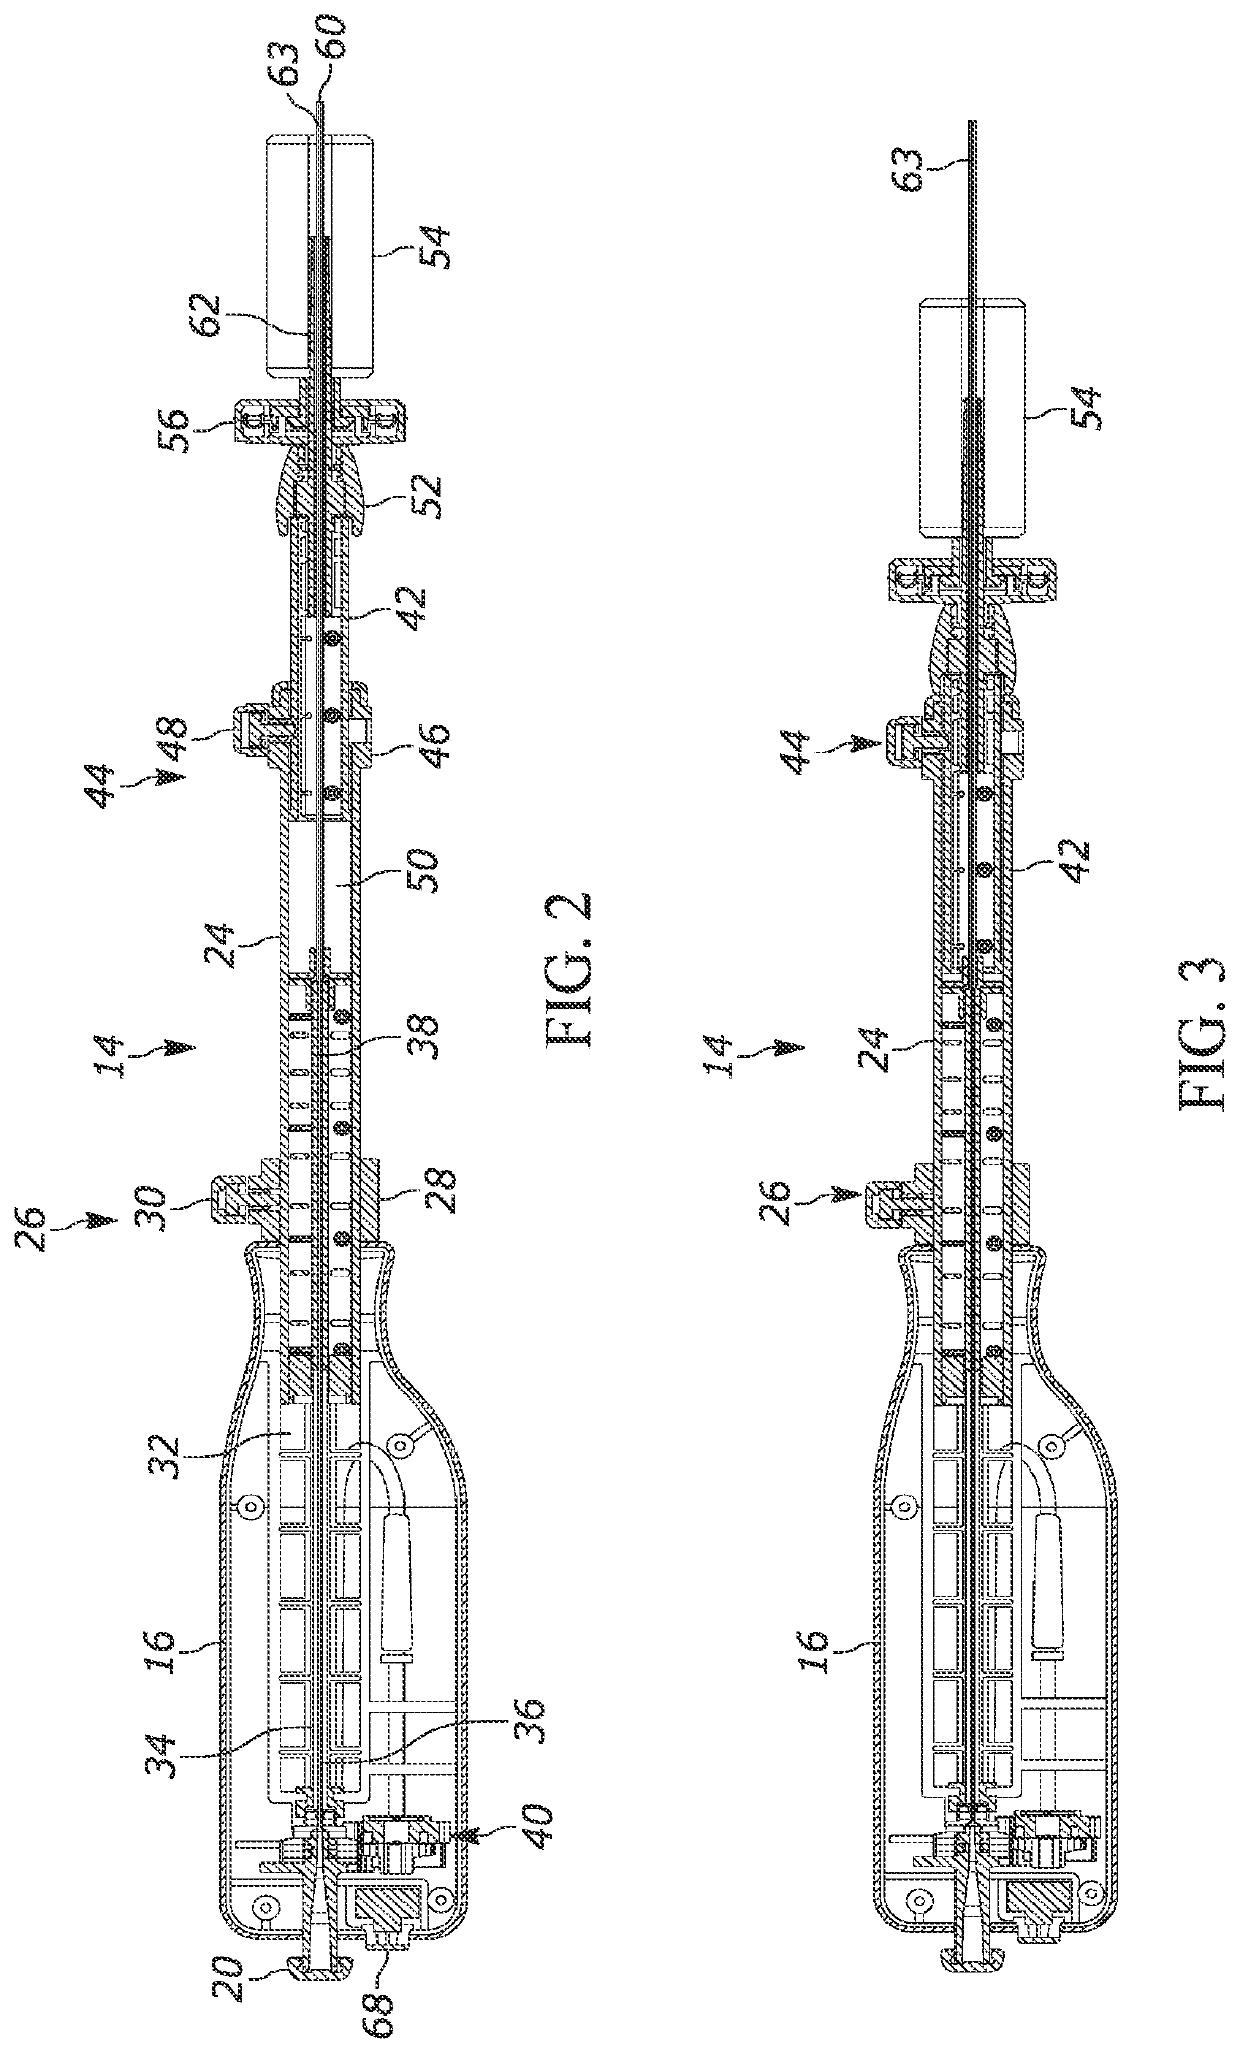 Telescoping needle assembly with rotating needle